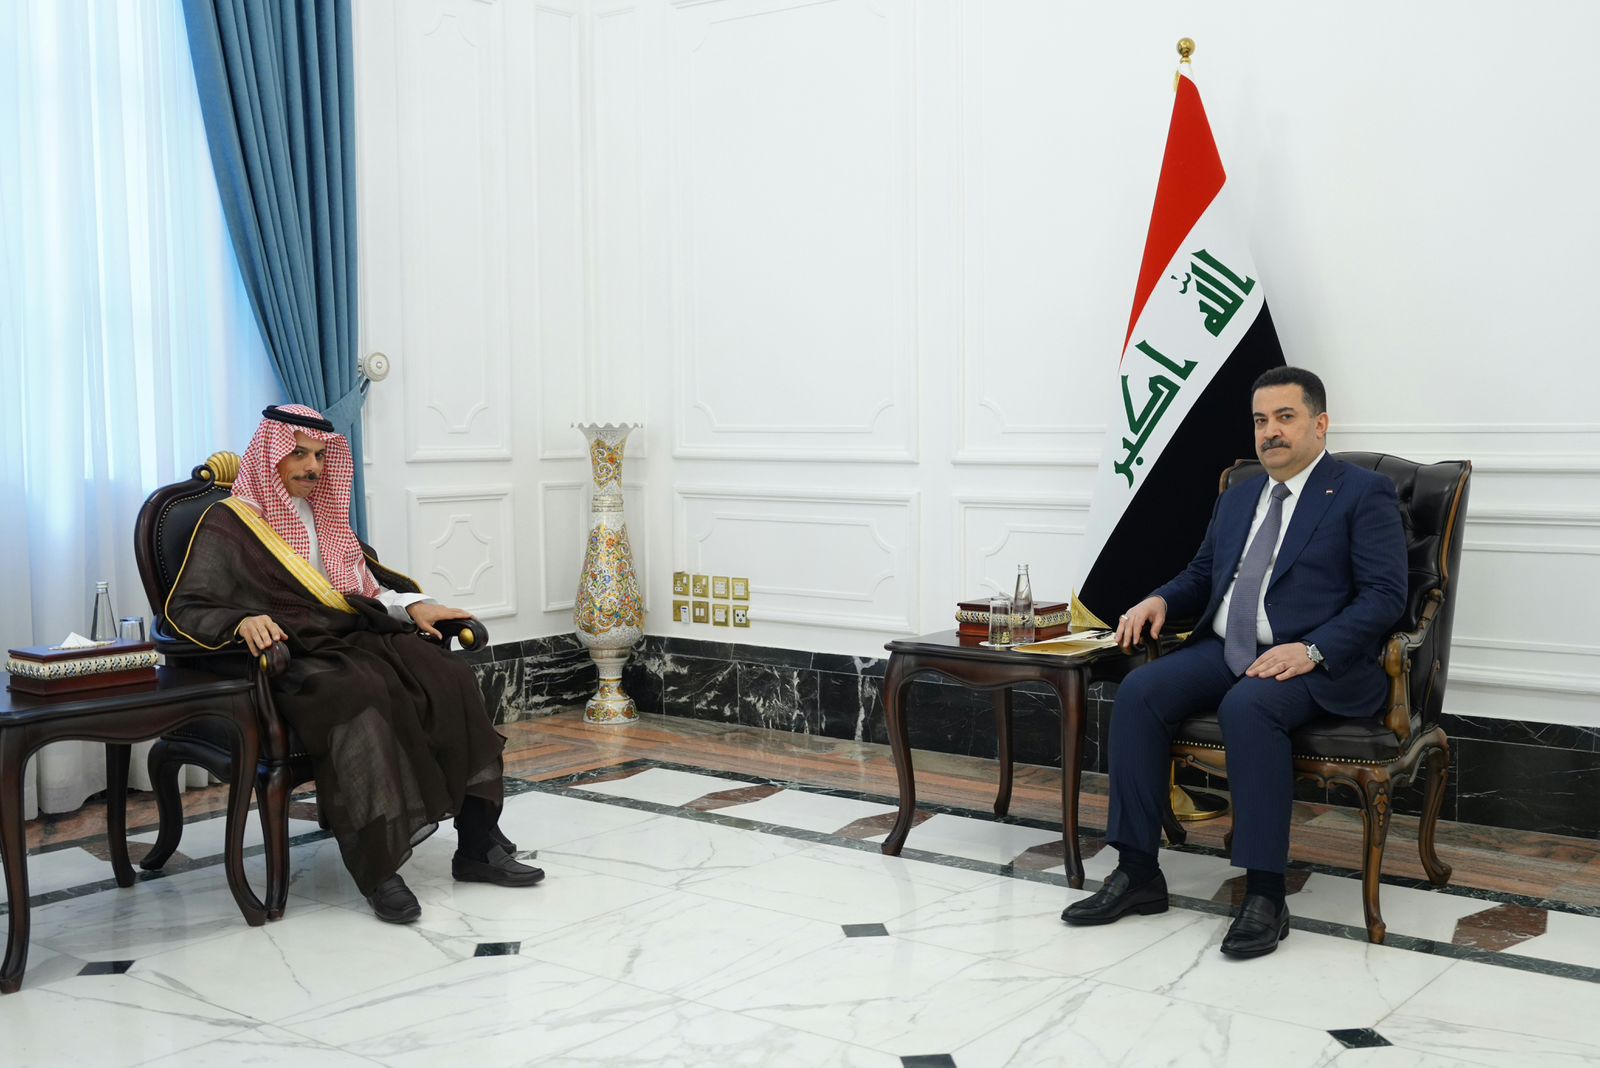 Iraqi PM meets with Saudi foreign minister to discuss Palestinian-Israeli clashes